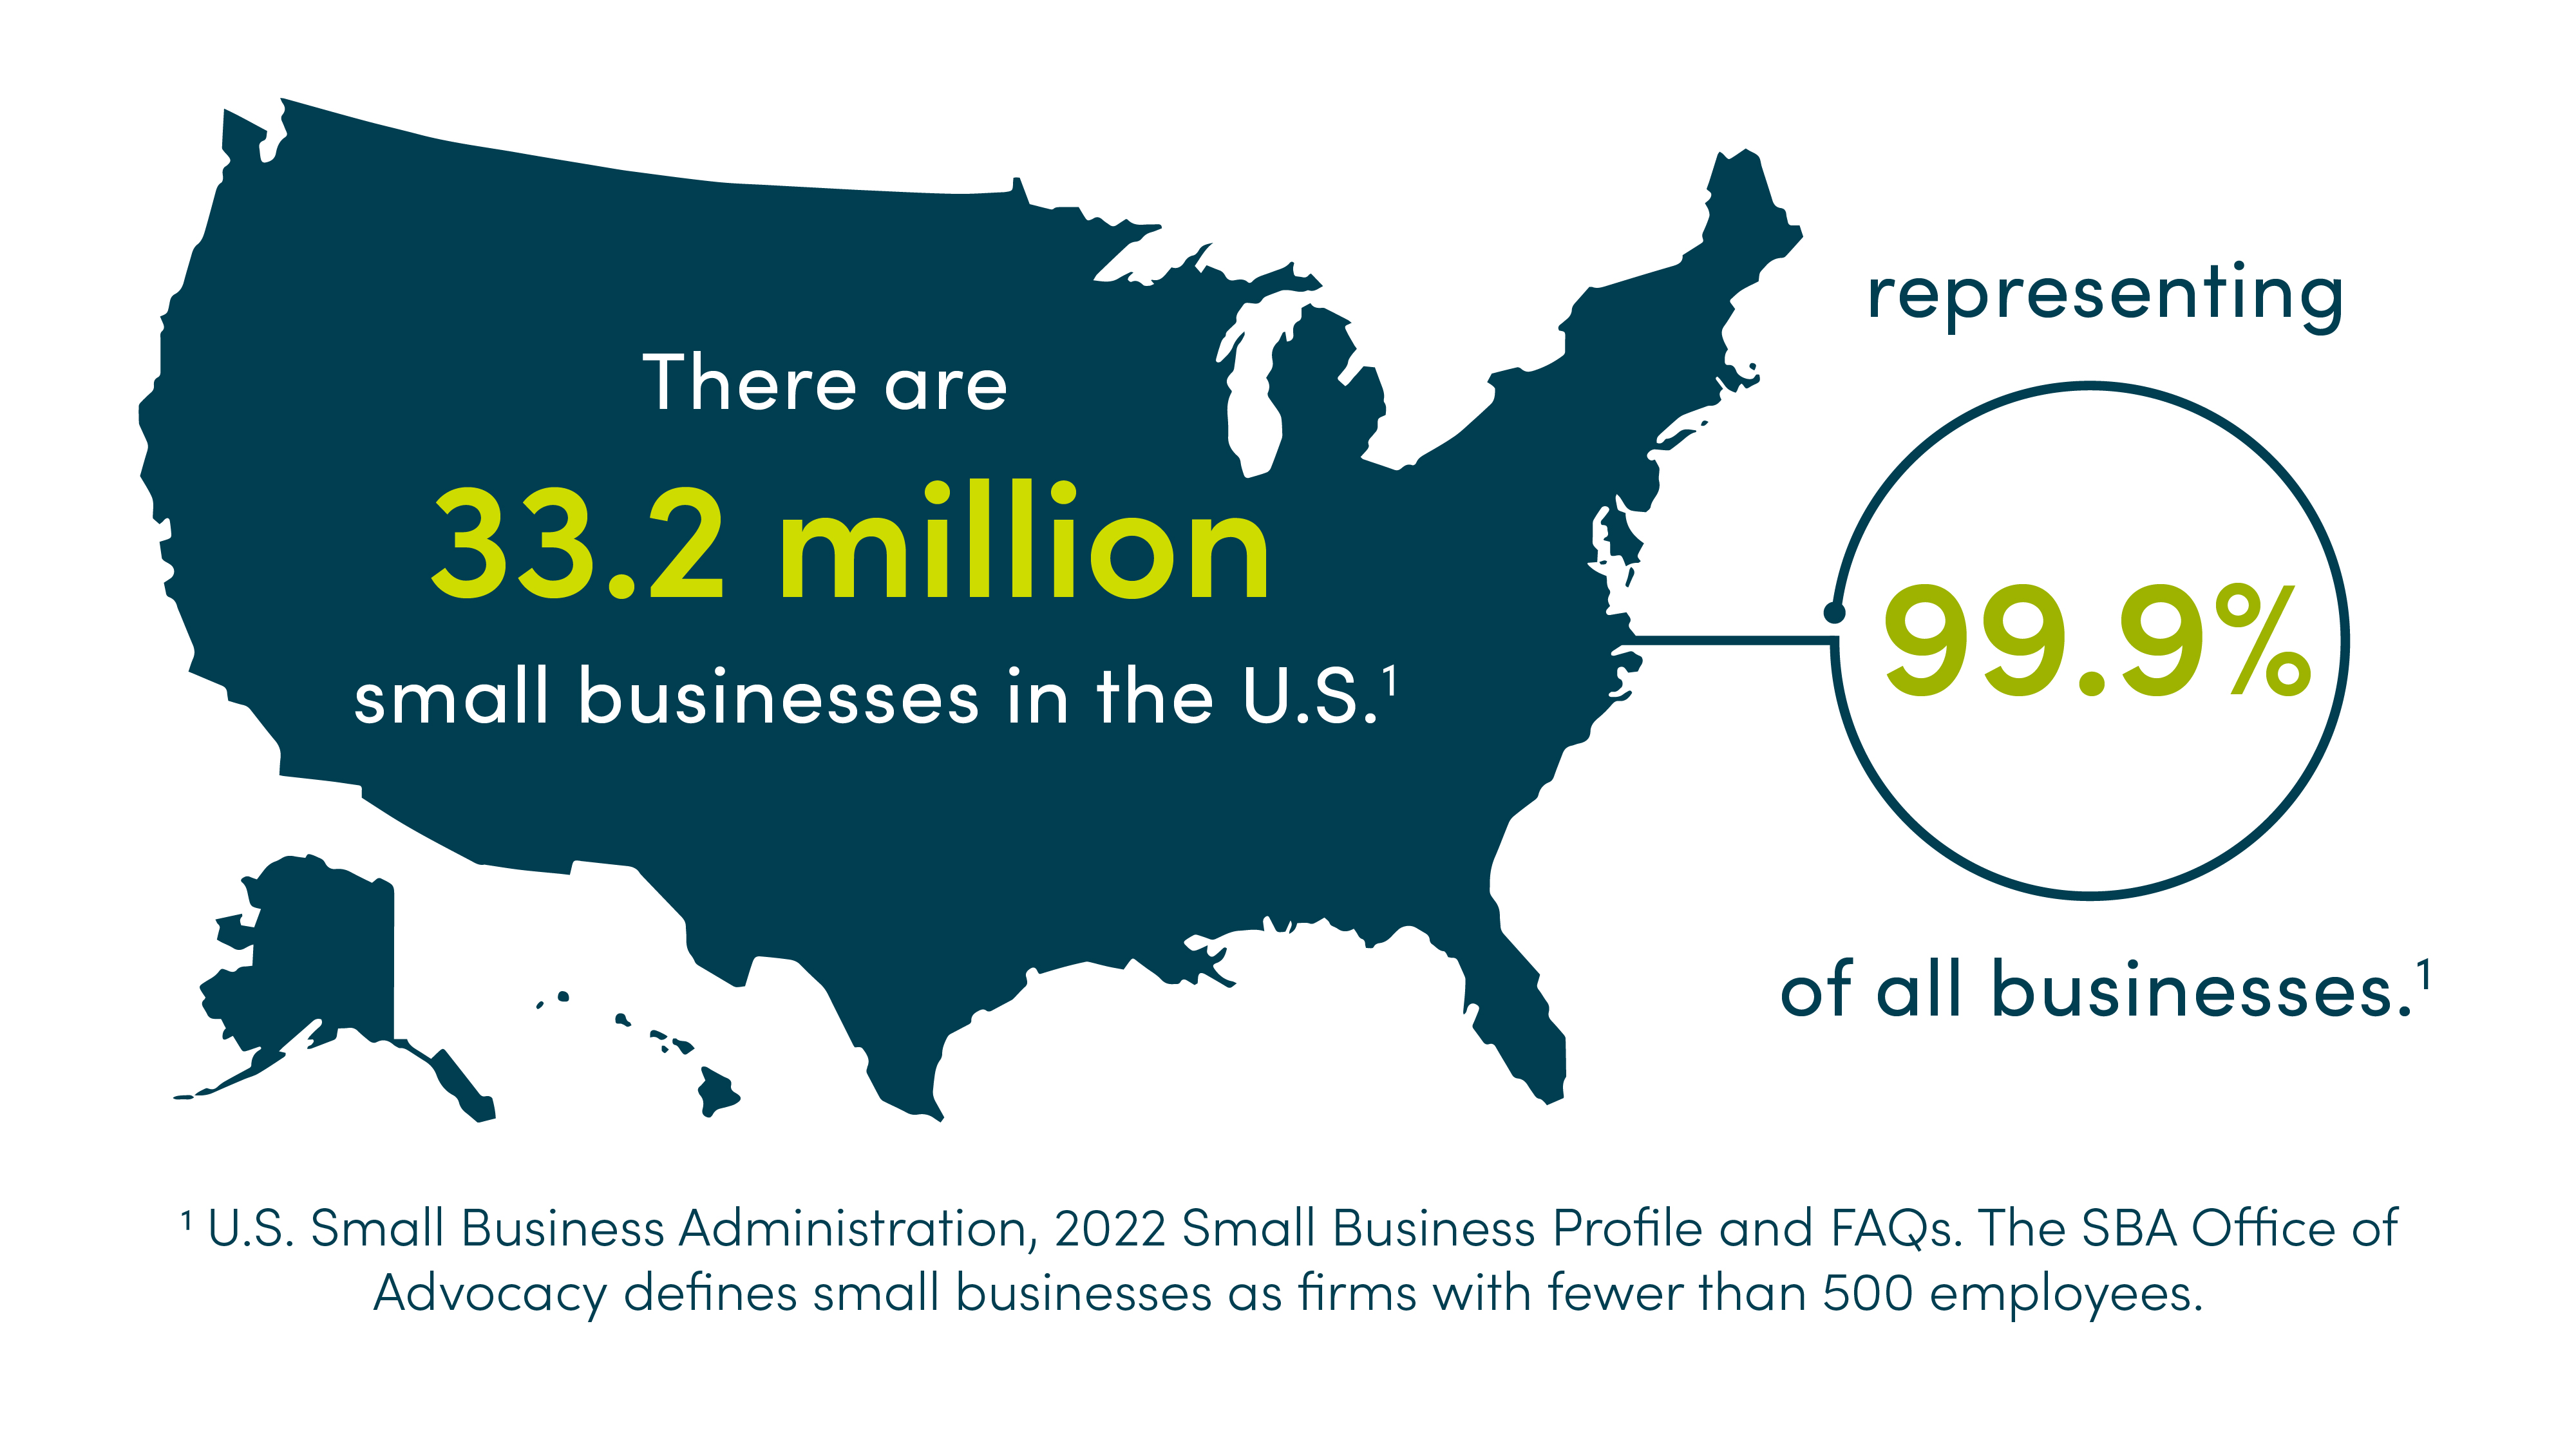 There are 33.2 million small businesses in the U.S., representing 99.9% of all businesses